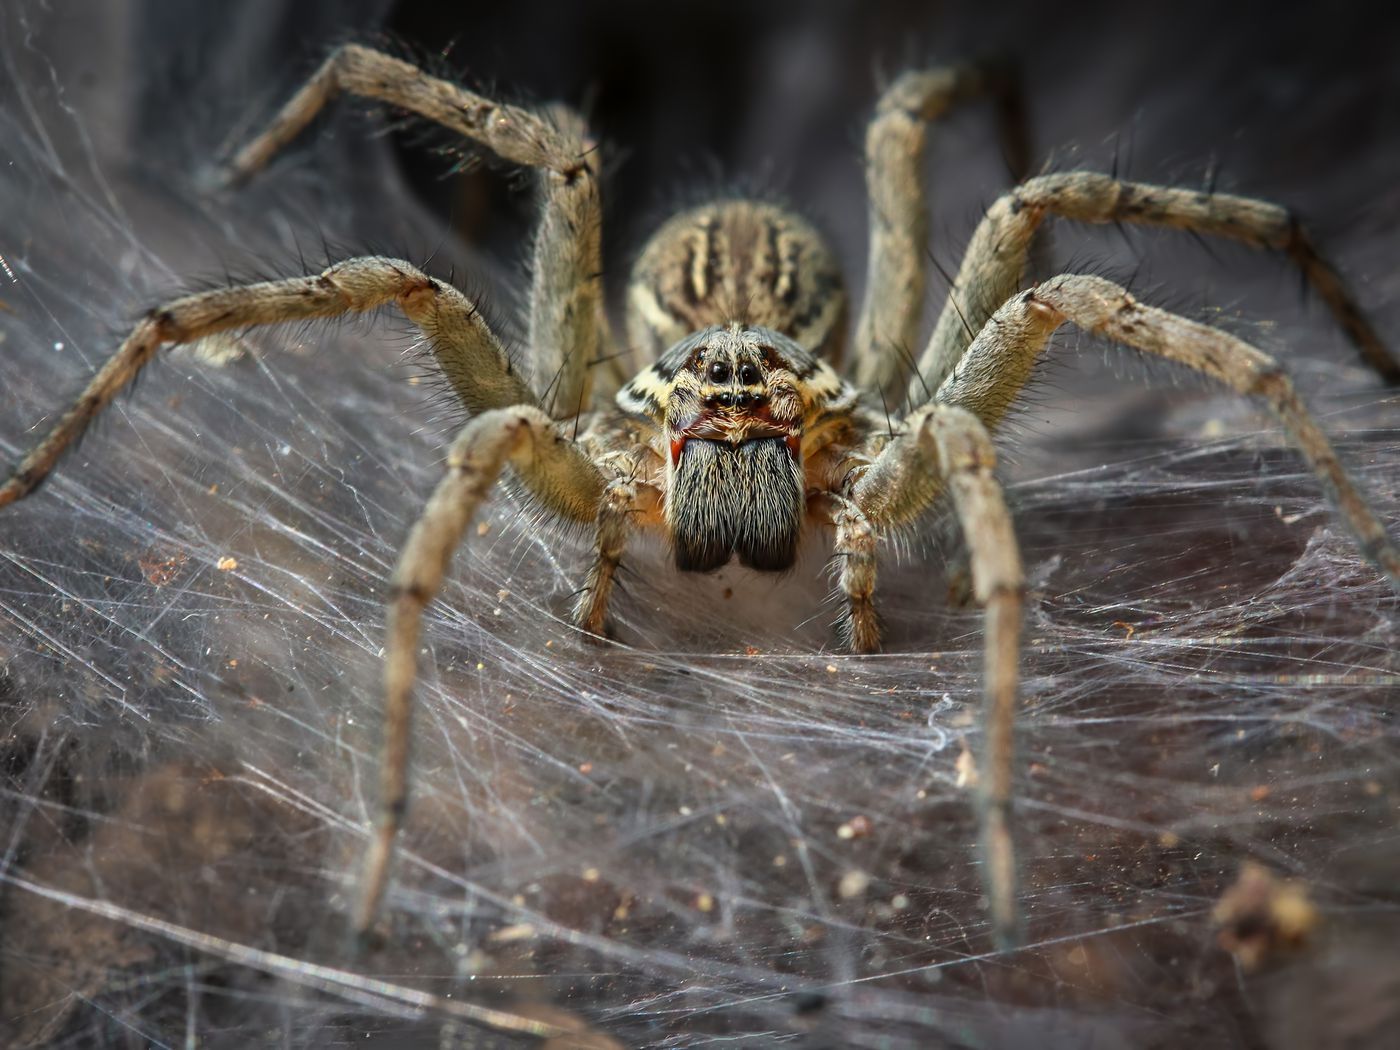 The Verge Review of Animals: spiders